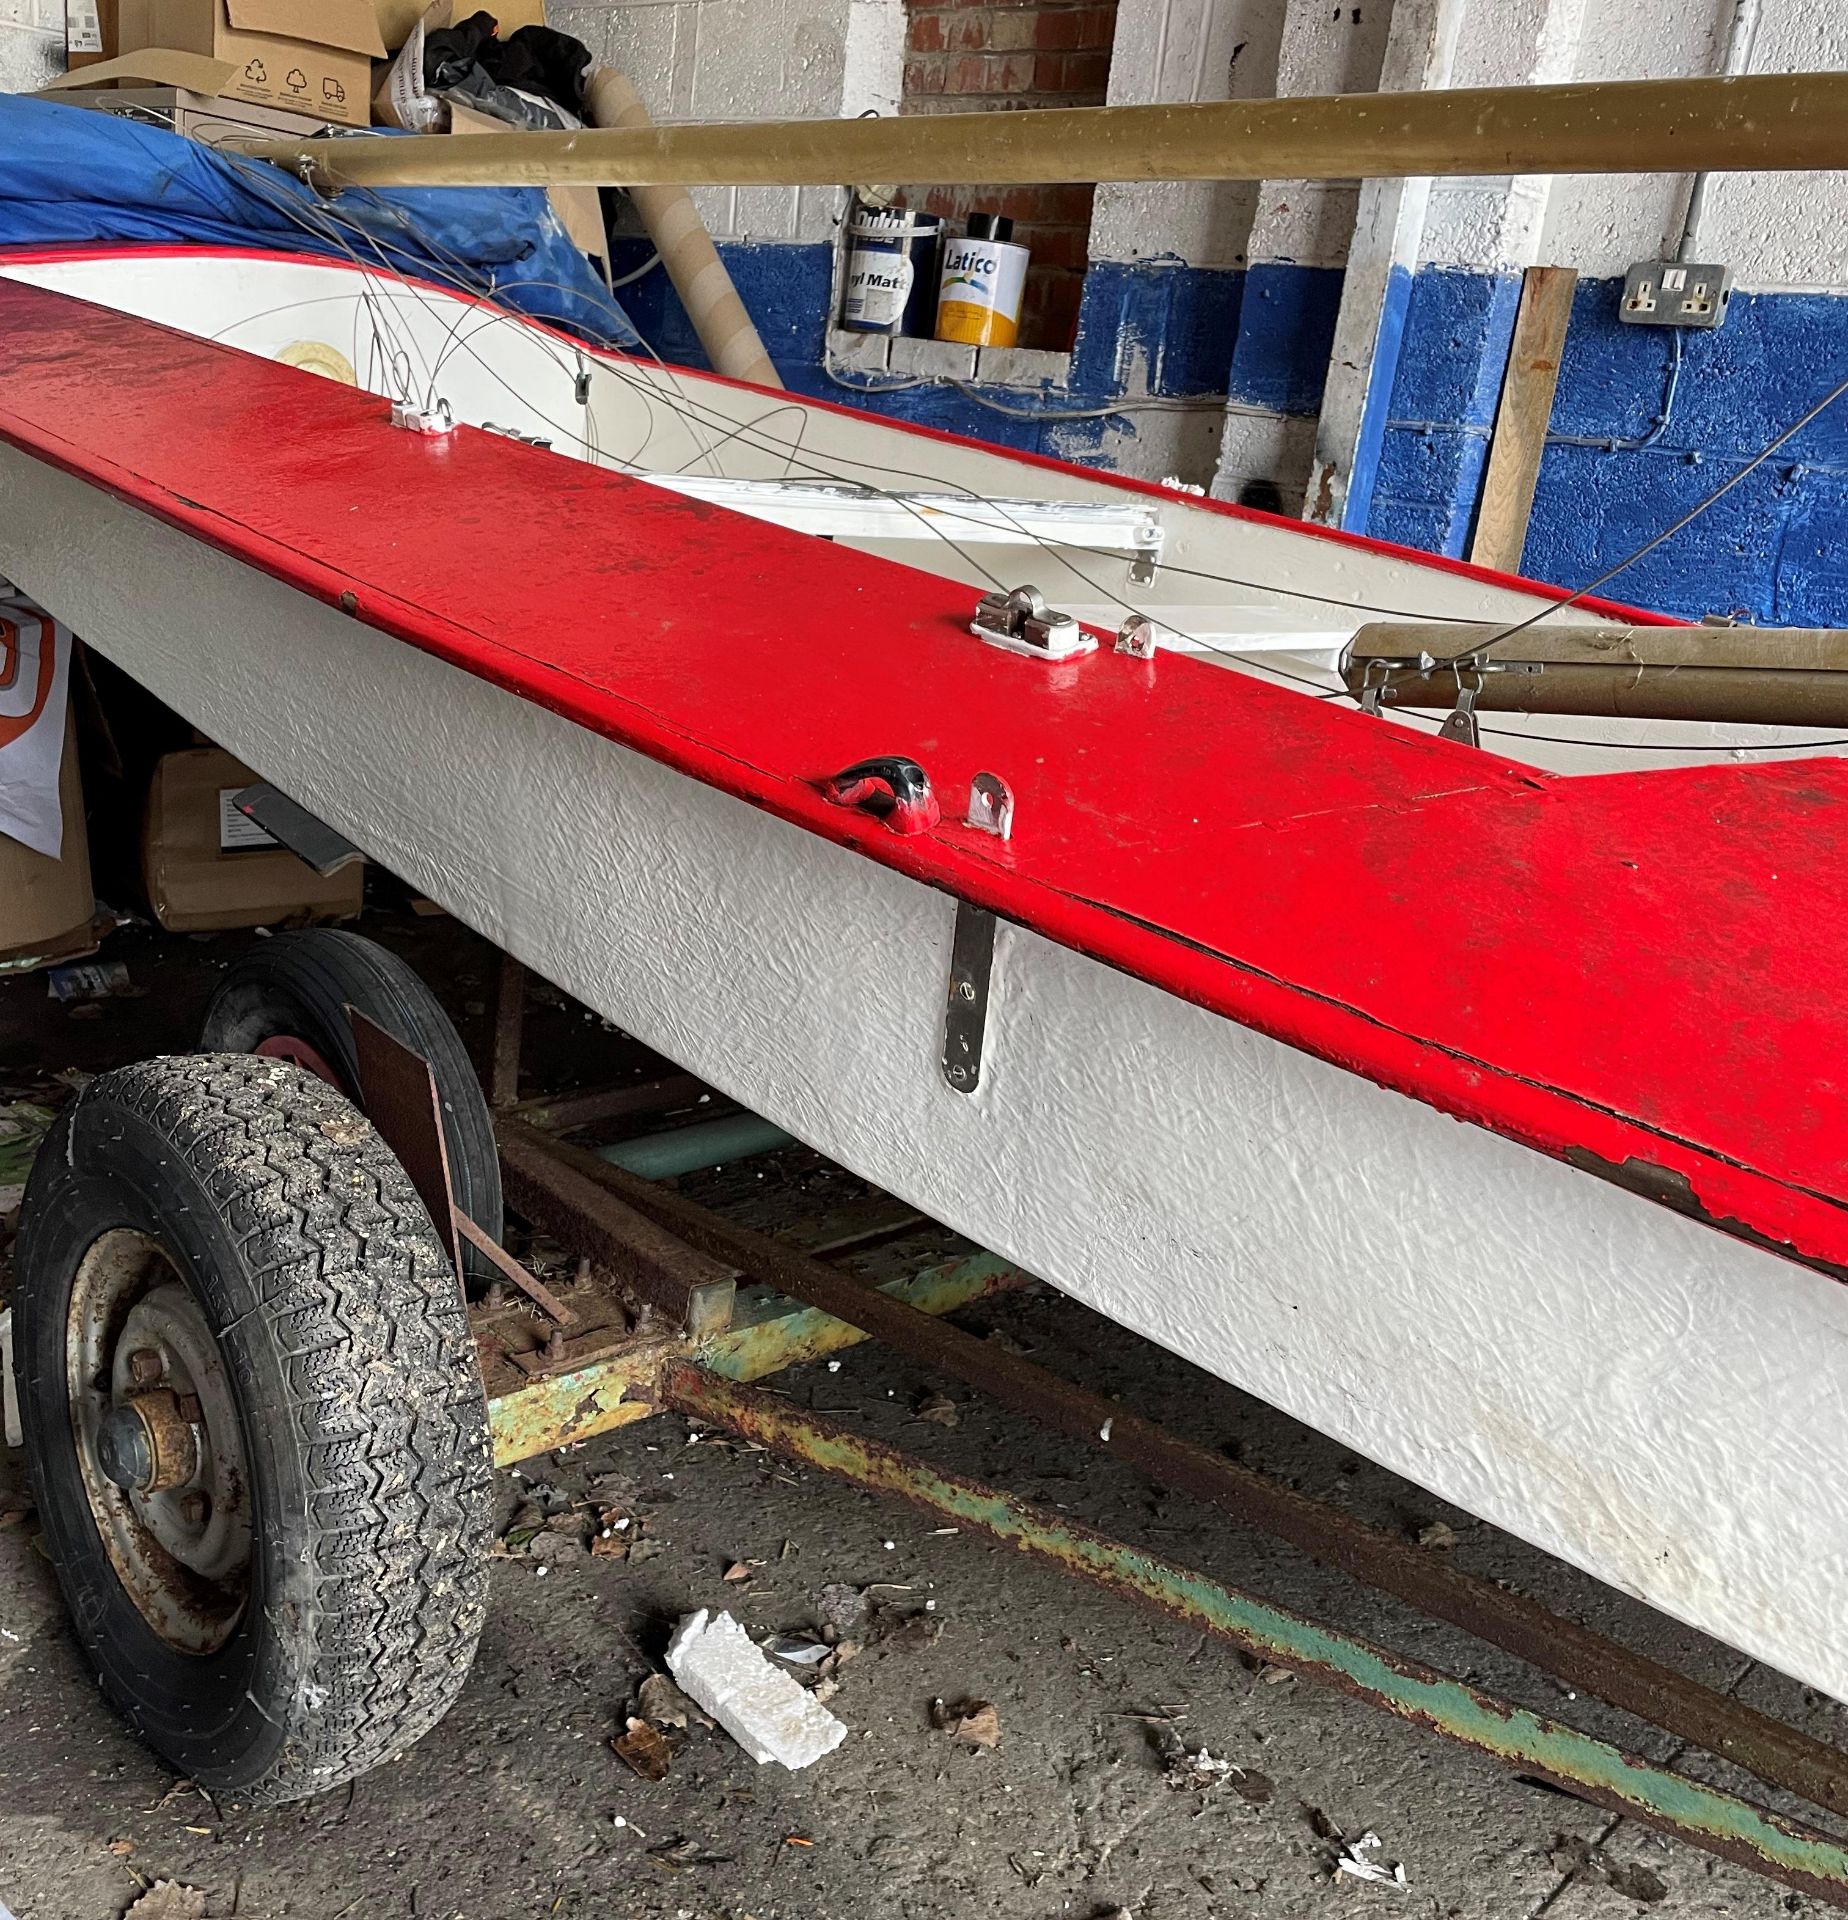 Red and white Fireball sailing boat with a 9' 9" (297cm) mast. - Image 18 of 24